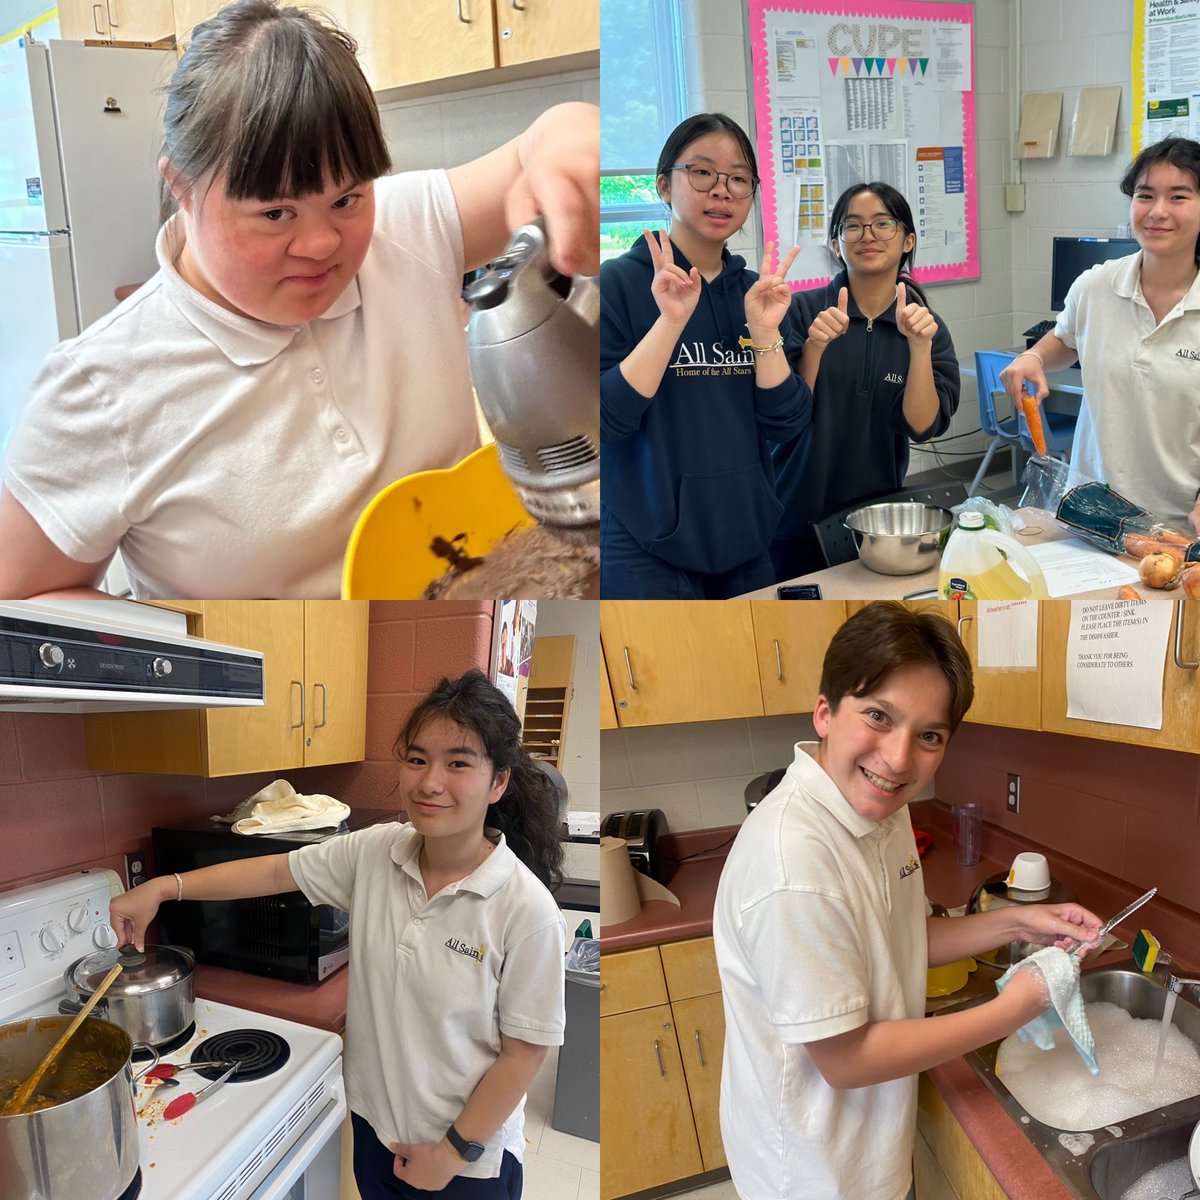 Yesterday evening, our @AllSaintsCES Luke 4.18 Committee hosted an ‘Out of the Cold’ Casserole Cooking Event, putting faith first & promoting social justice. Our students prepared meals for Good Shepherd Ministries in Toronto, donated through St. Patrick Markham Parish 🫶✨🙌👨‍🍳👩‍🍳